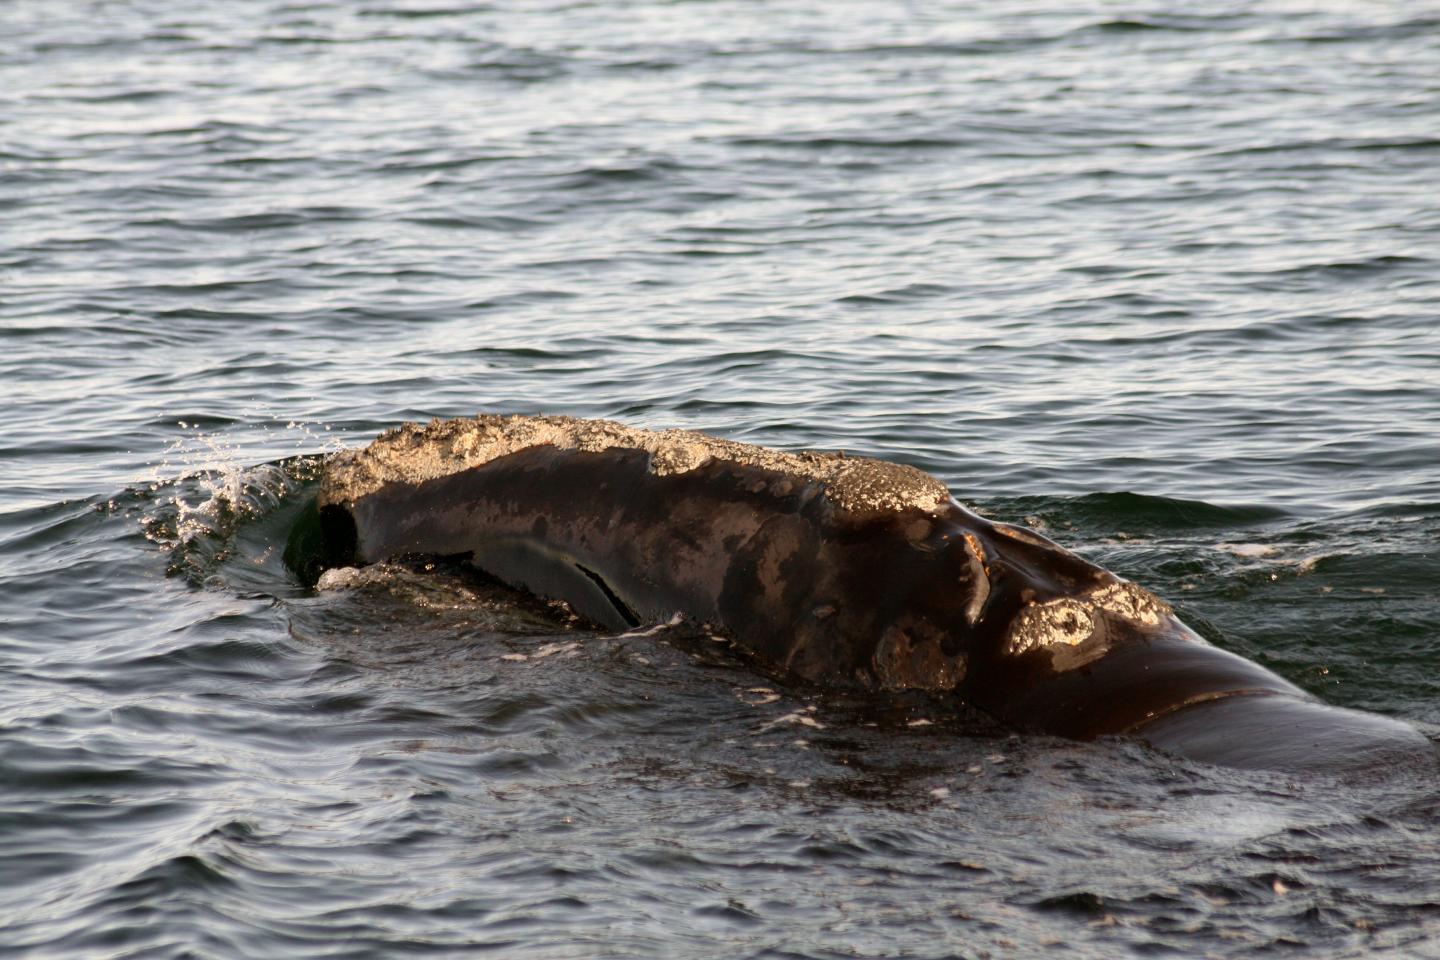 North Atlantic Right Whale at Surface